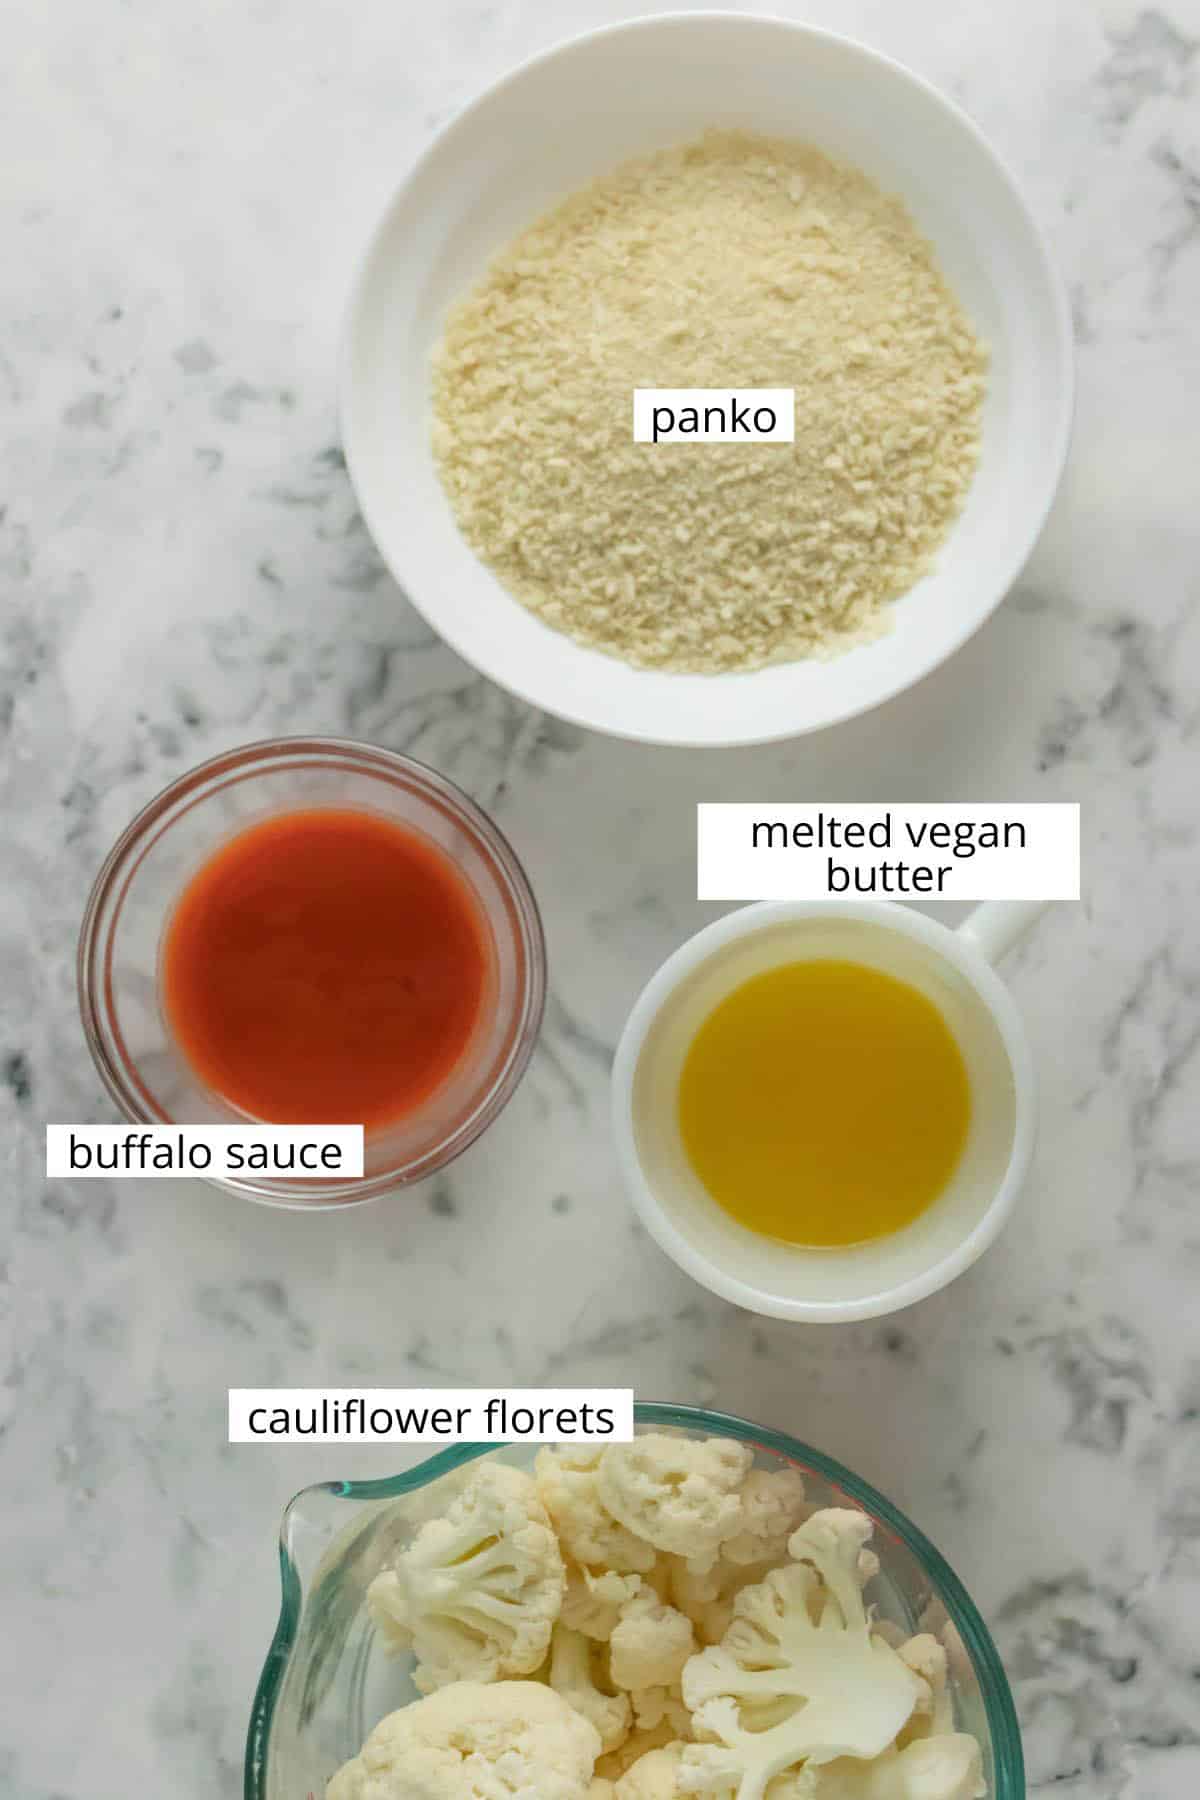 image collage of panko, buffalo sauce, vegan butter, and cauliflower in bowls on a table with text labels